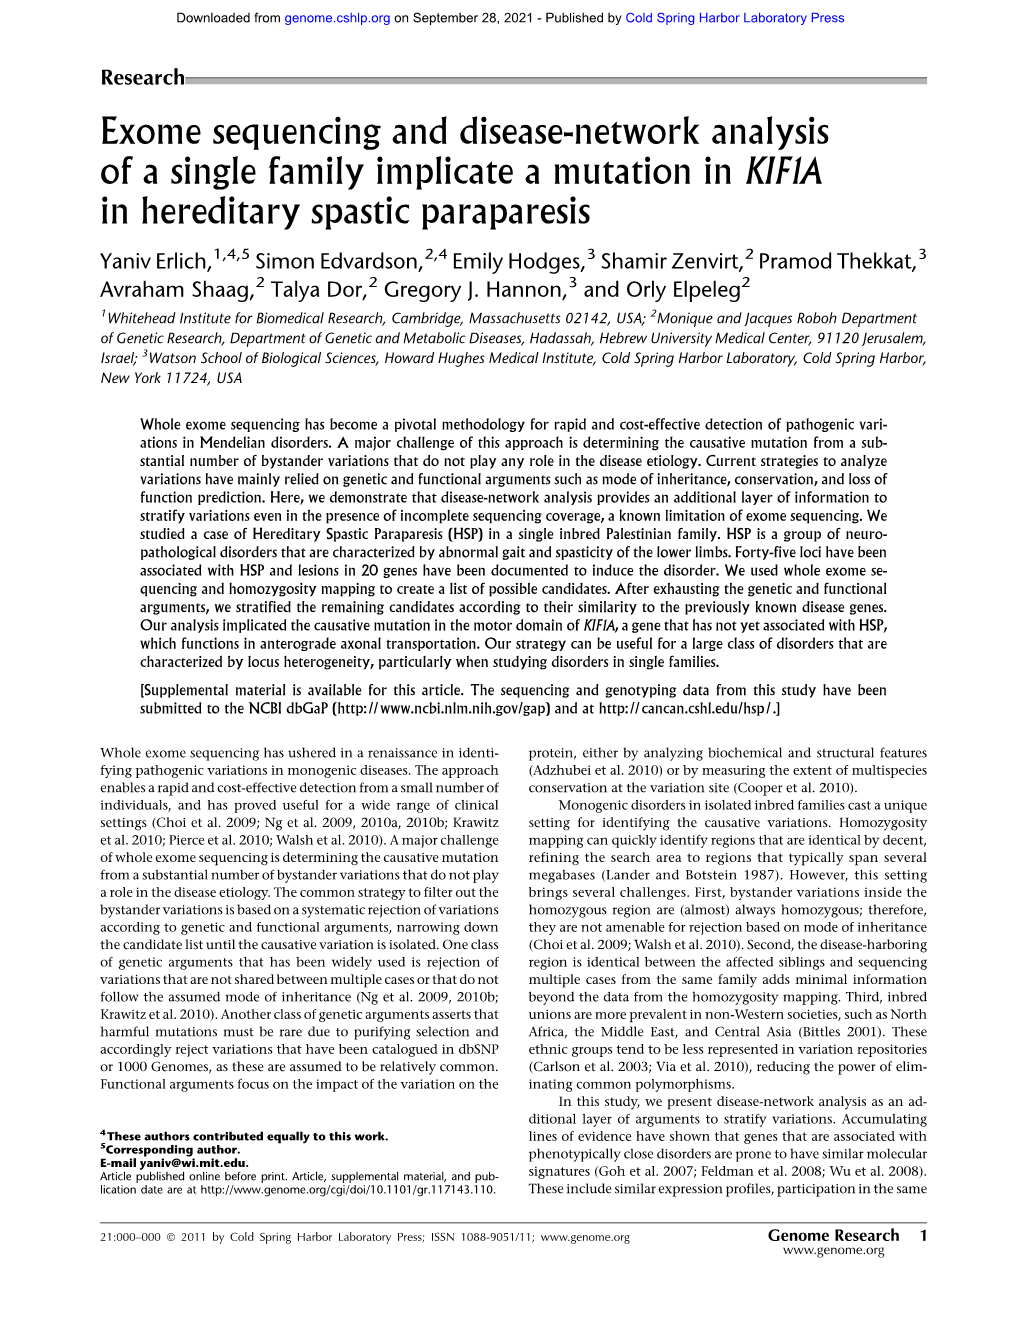 Exome Sequencing and Disease-Network Analysis of a Single Family Implicate a Mutation in KIF1A in Hereditary Spastic Paraparesis